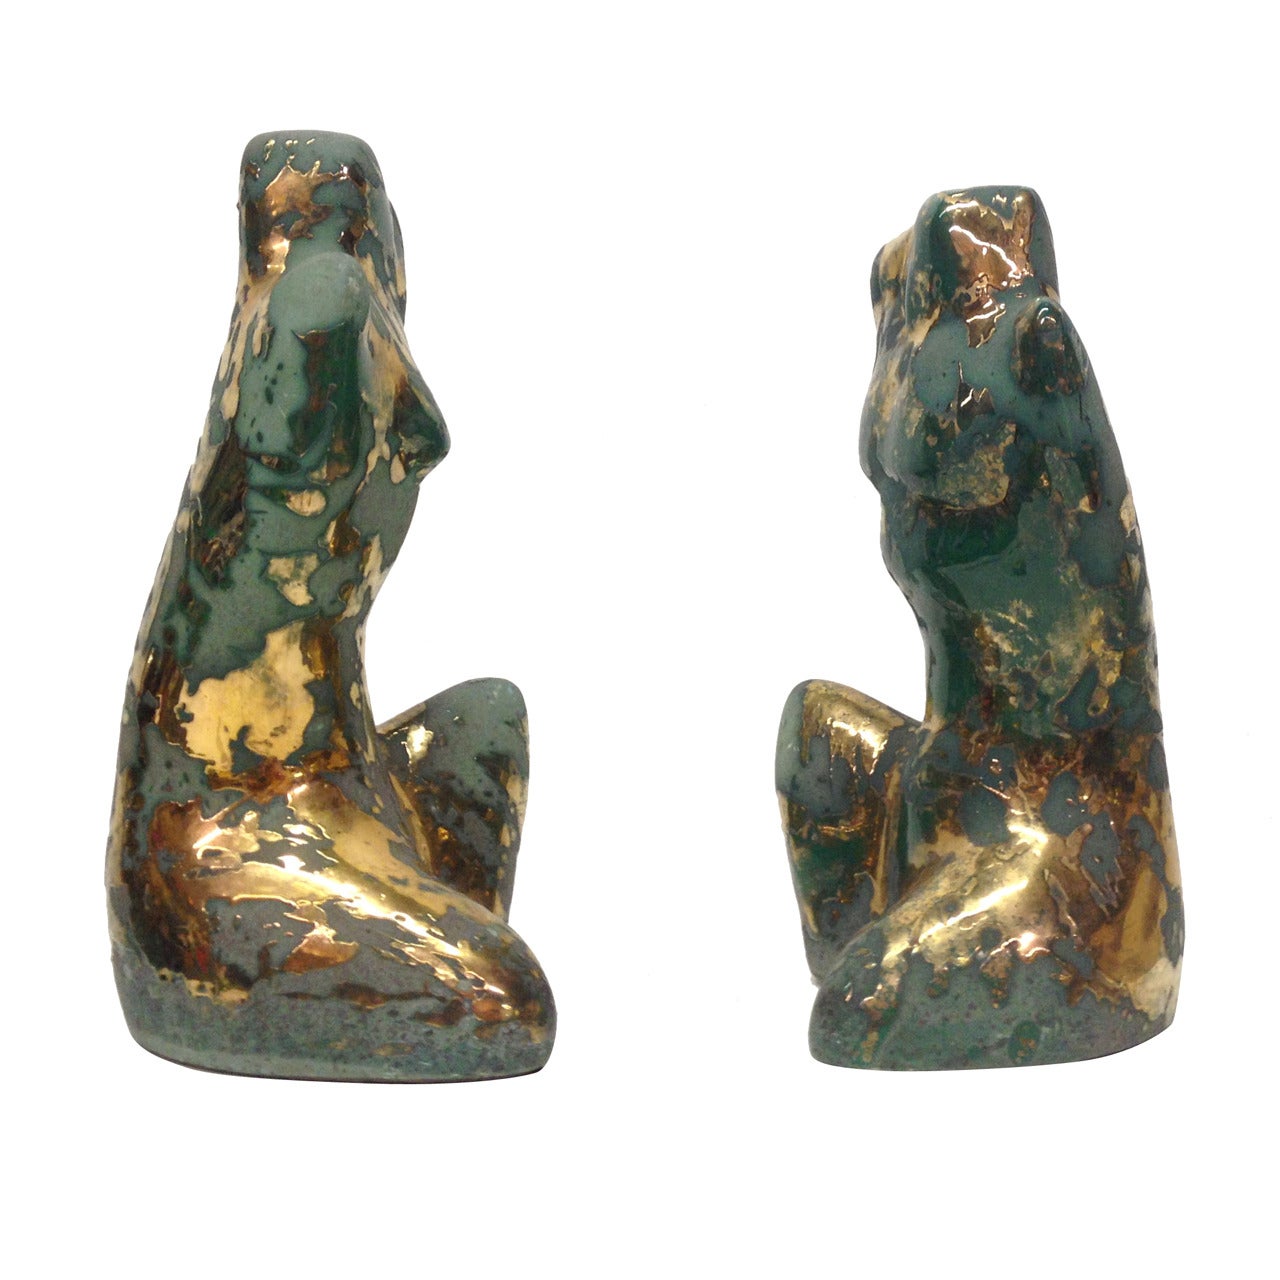 Gilded and Oxidized Man and Woman Sculptures